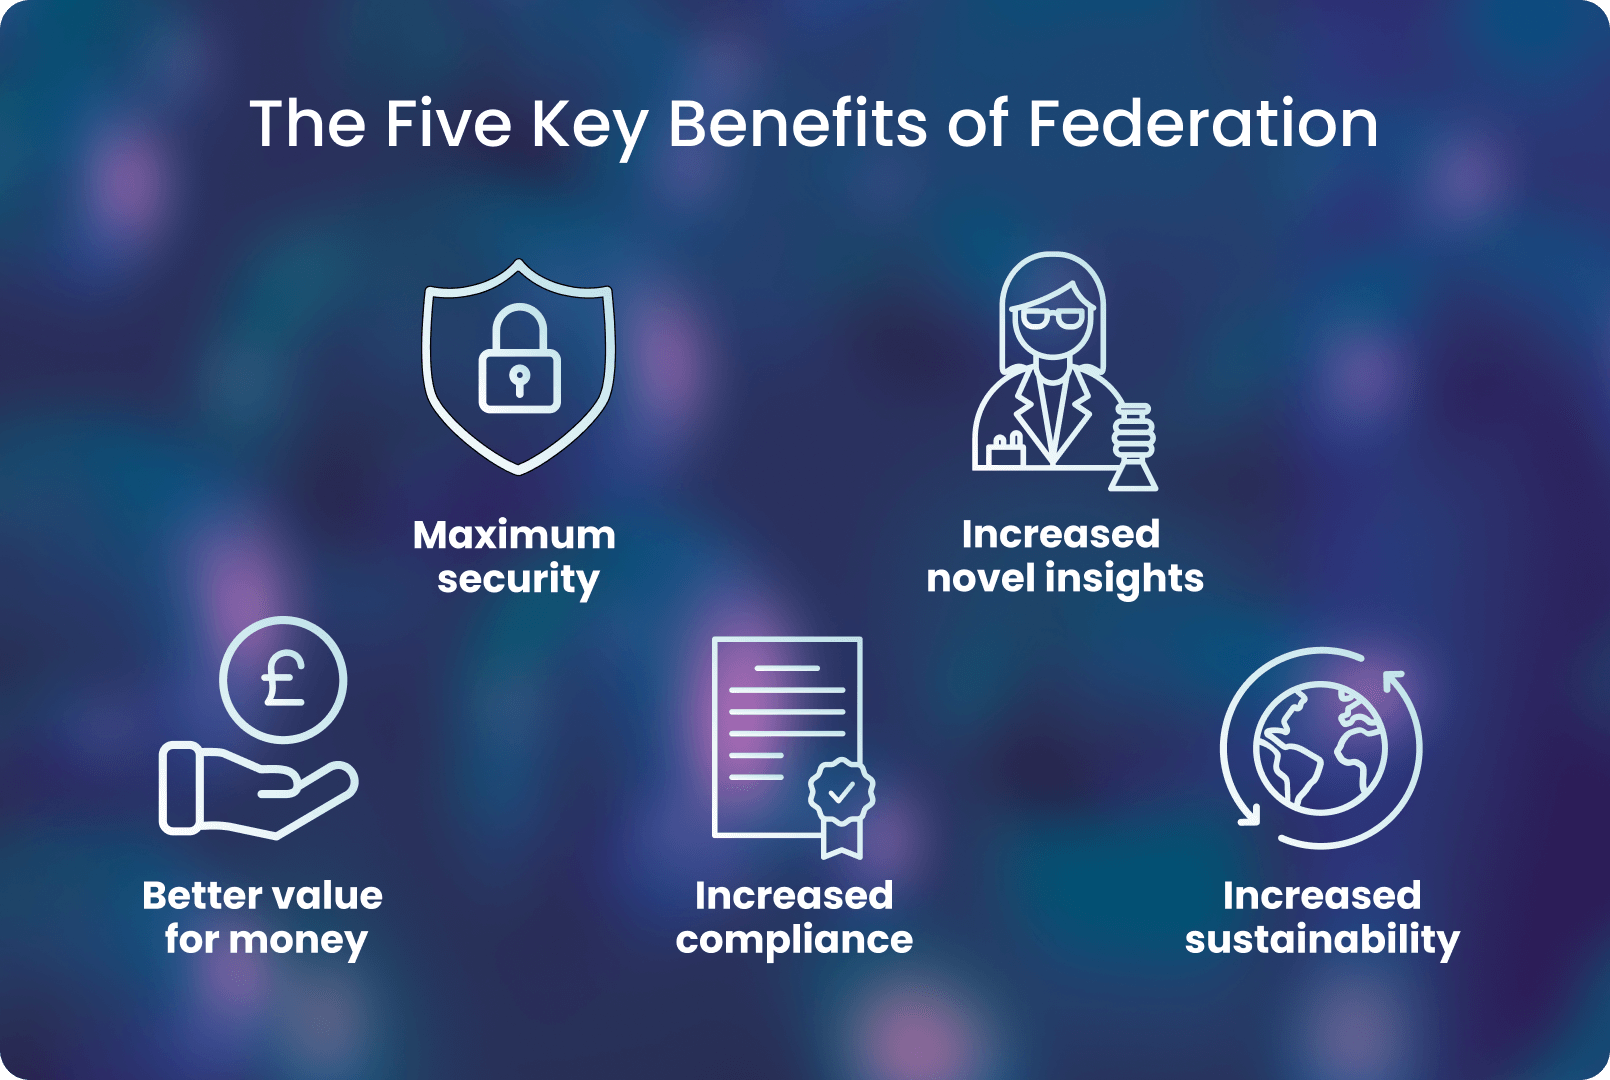 Data federation can bring many wide ranging benefits to researchers